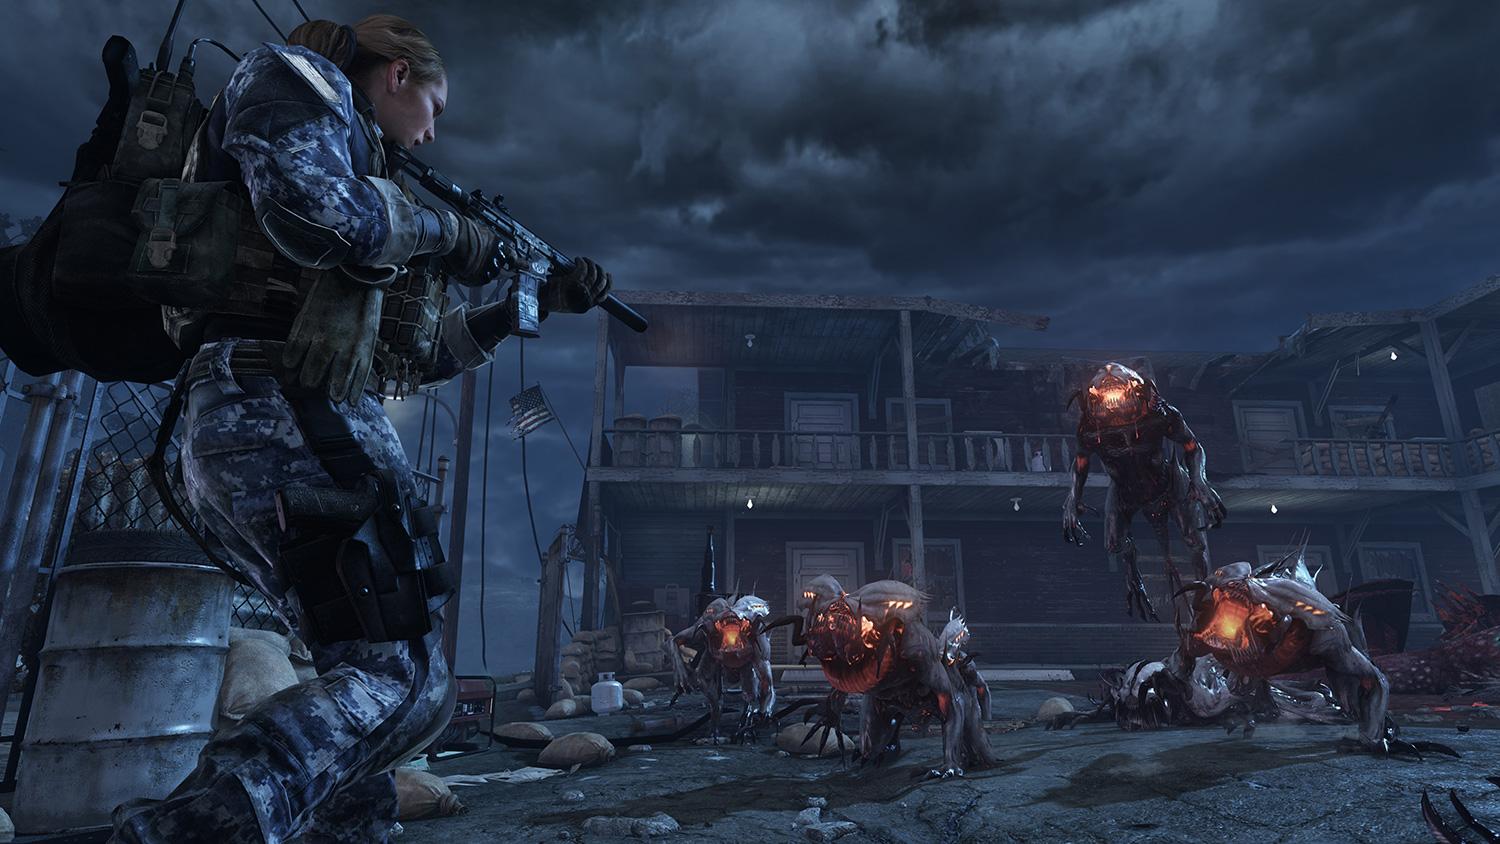 Is Call of Duty Ghosts 2 canceled?